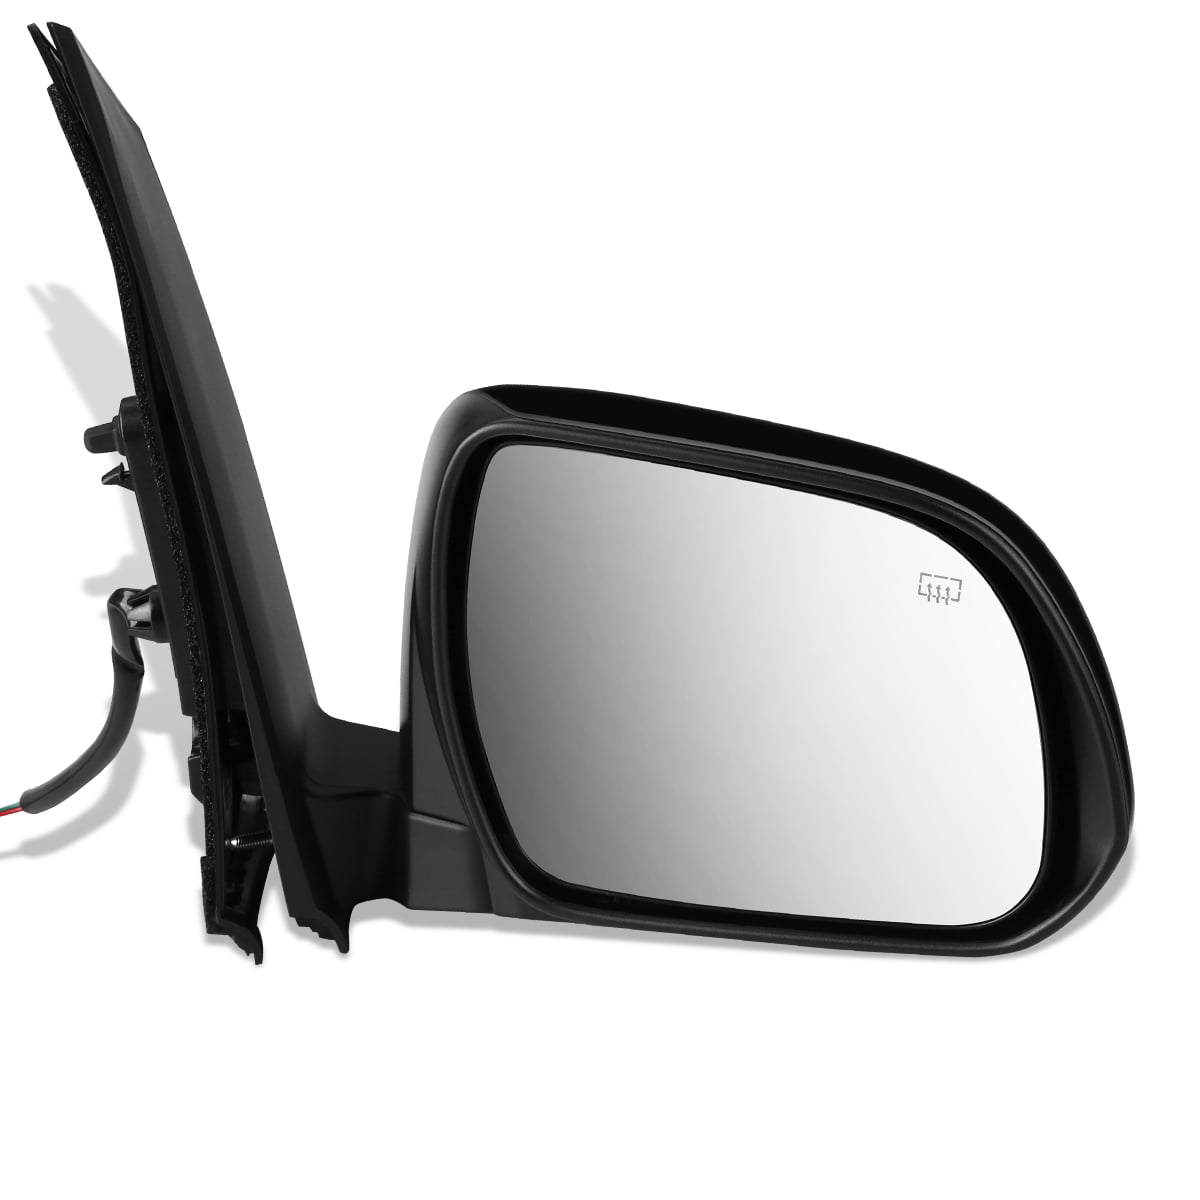 NEW PASSENGERS SIDE POWER MIRROR GLASS REPLACEMENT 2003-2007 CADILLAC CTS 7124